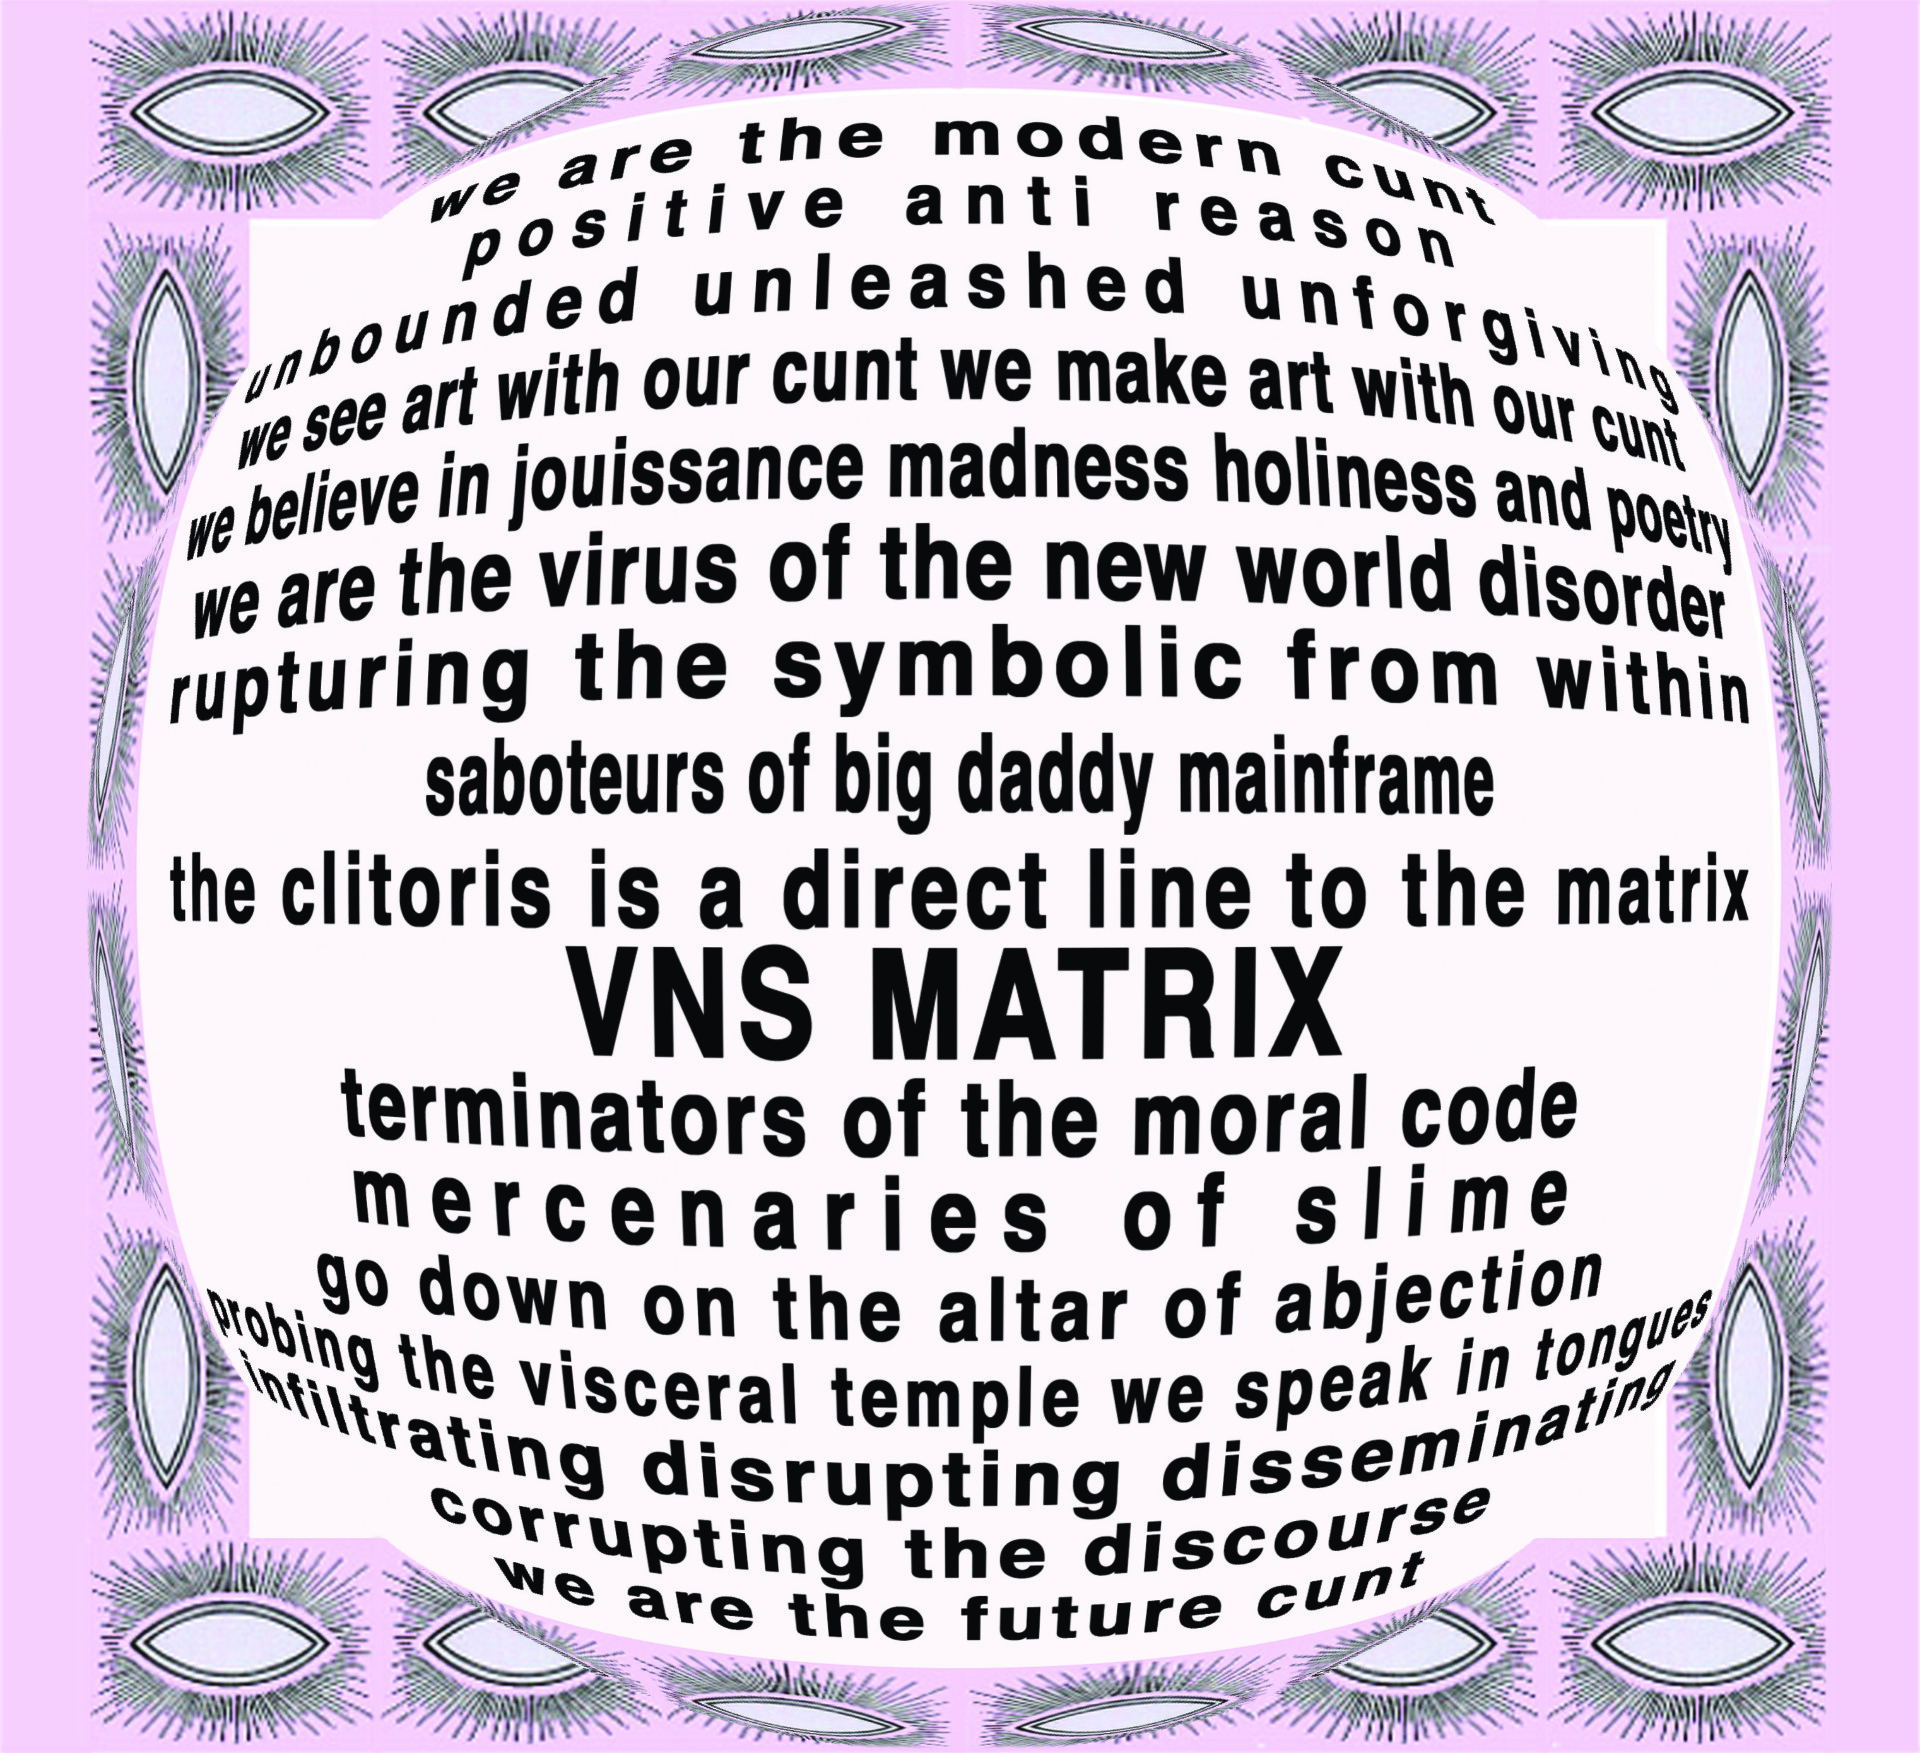 cyberfeminist manifesto text stretched across bubble on pink background